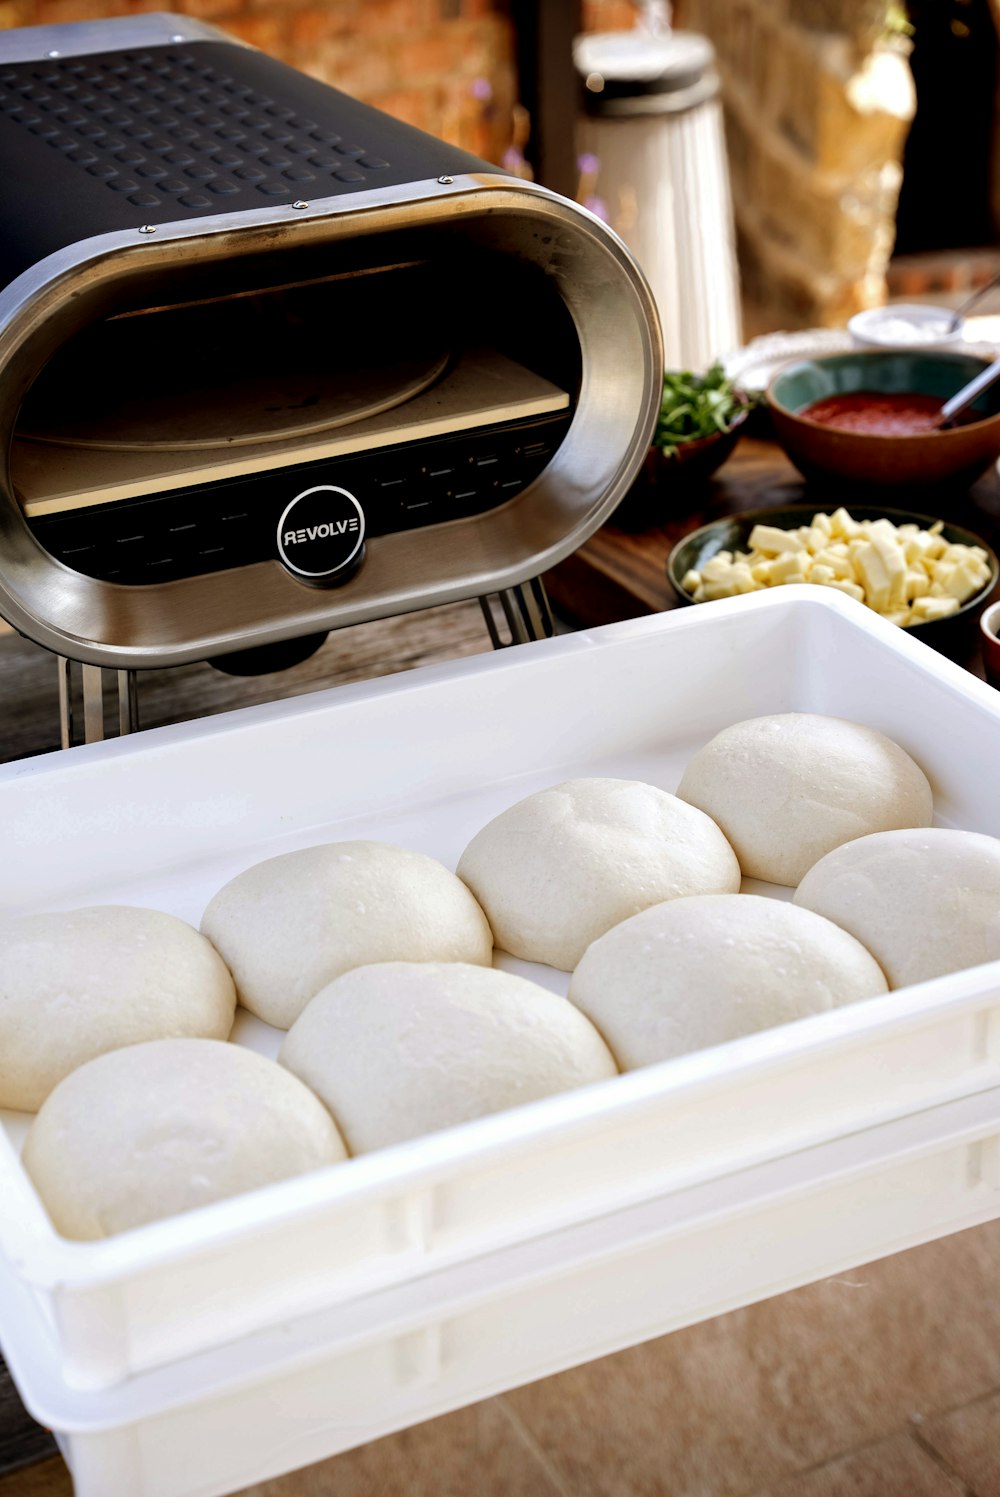 a pan filled with food next to a toaster oven